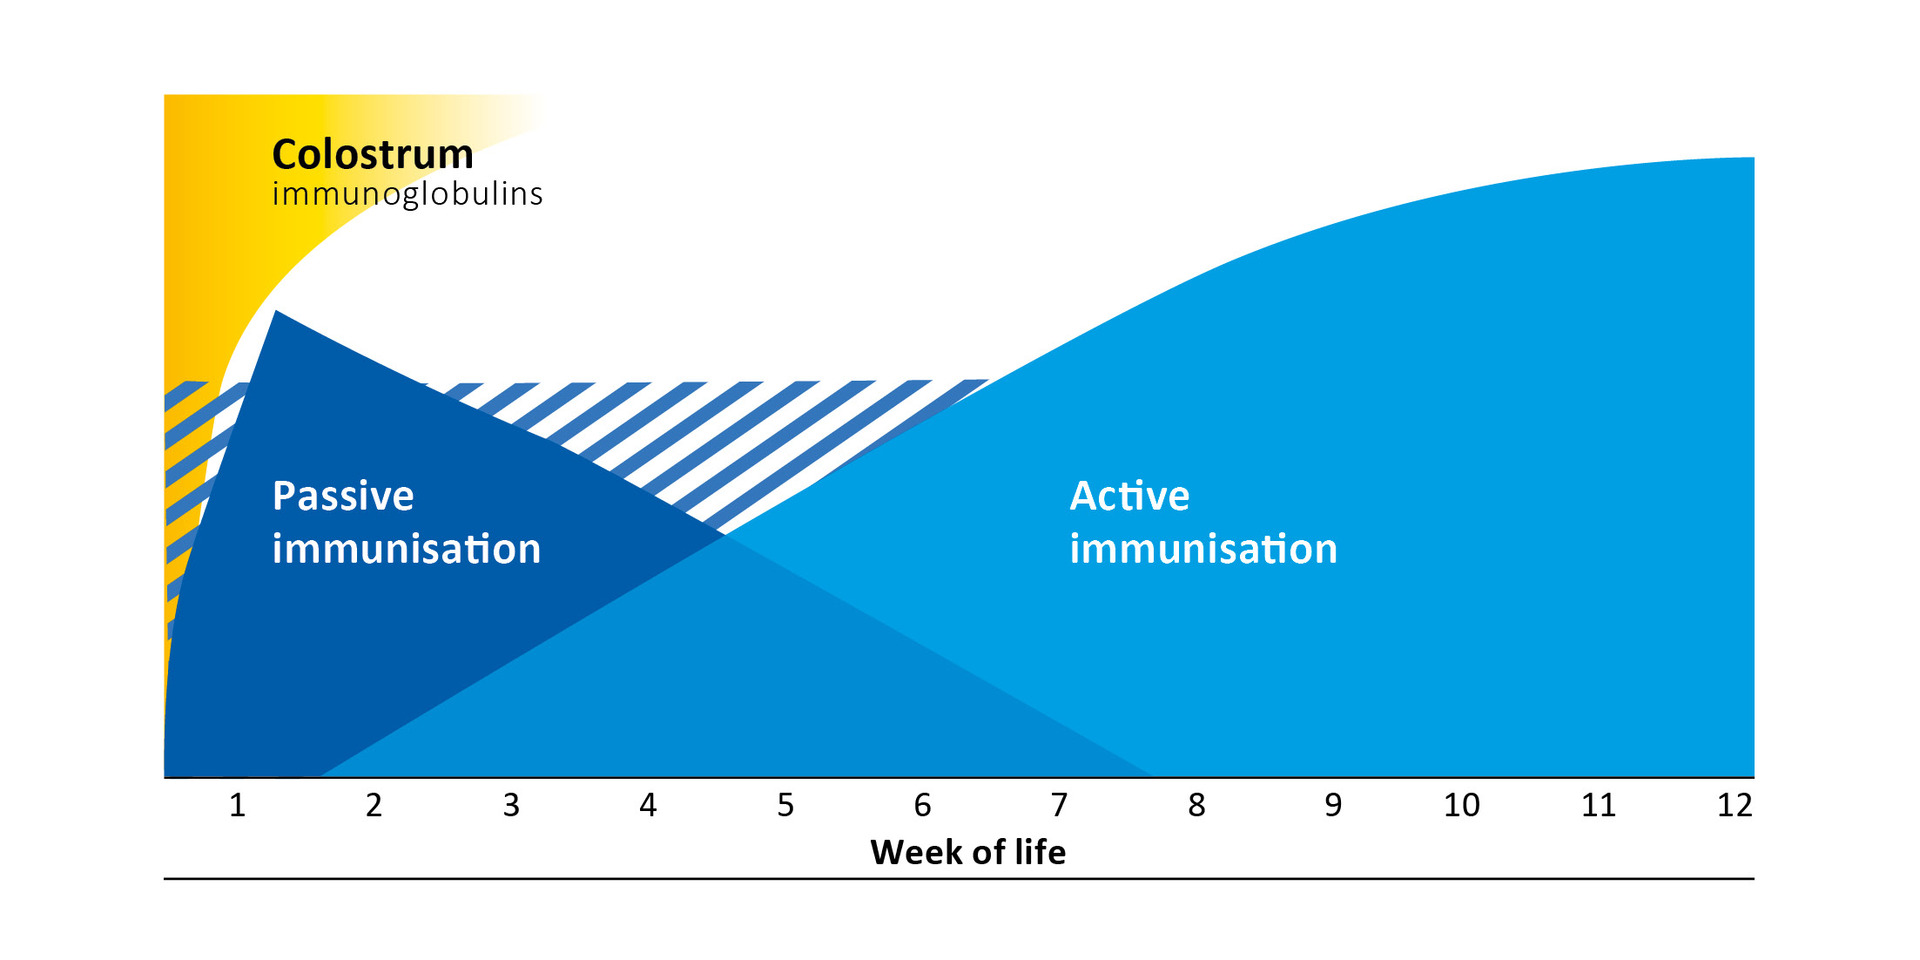 Progression of passive and active immunisation in calves